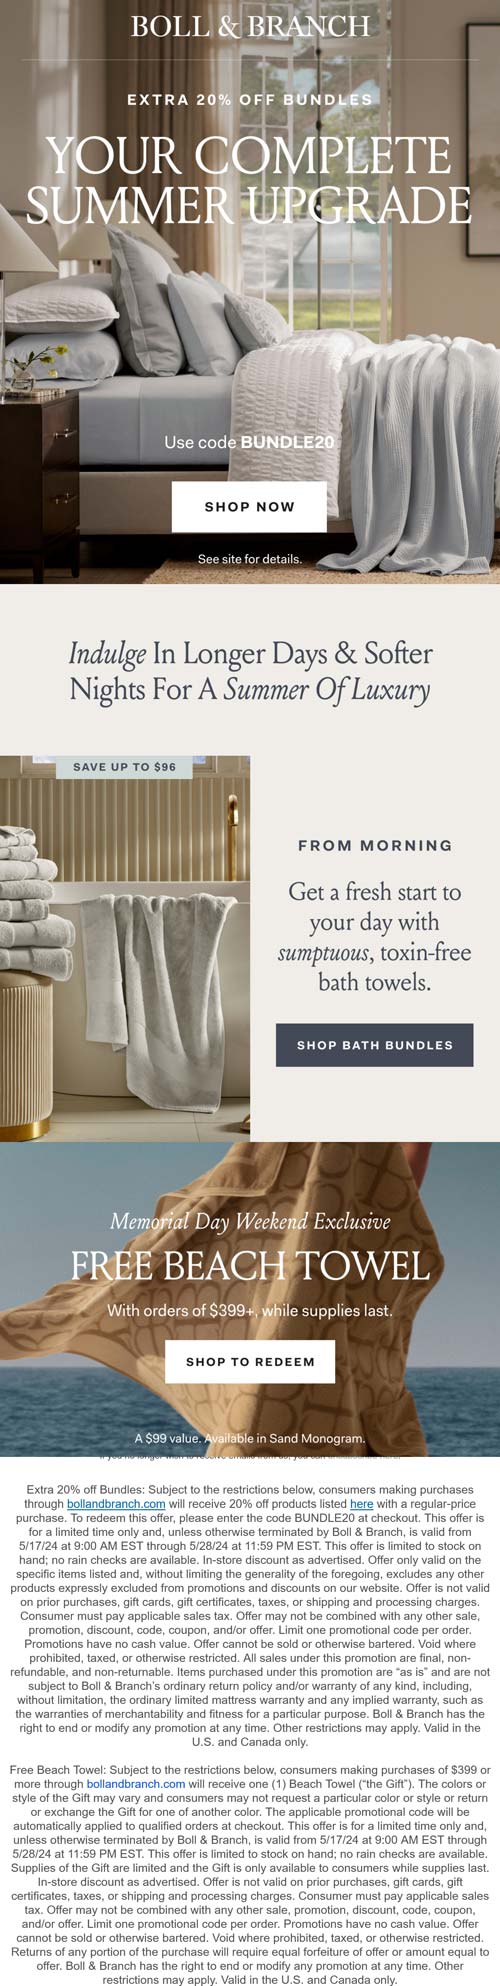 Boll & Branch stores Coupon  Extra 20% off bundles + free beach towel at Boll & Branch, or online via promo code BUNDLE20 #bollbranch 